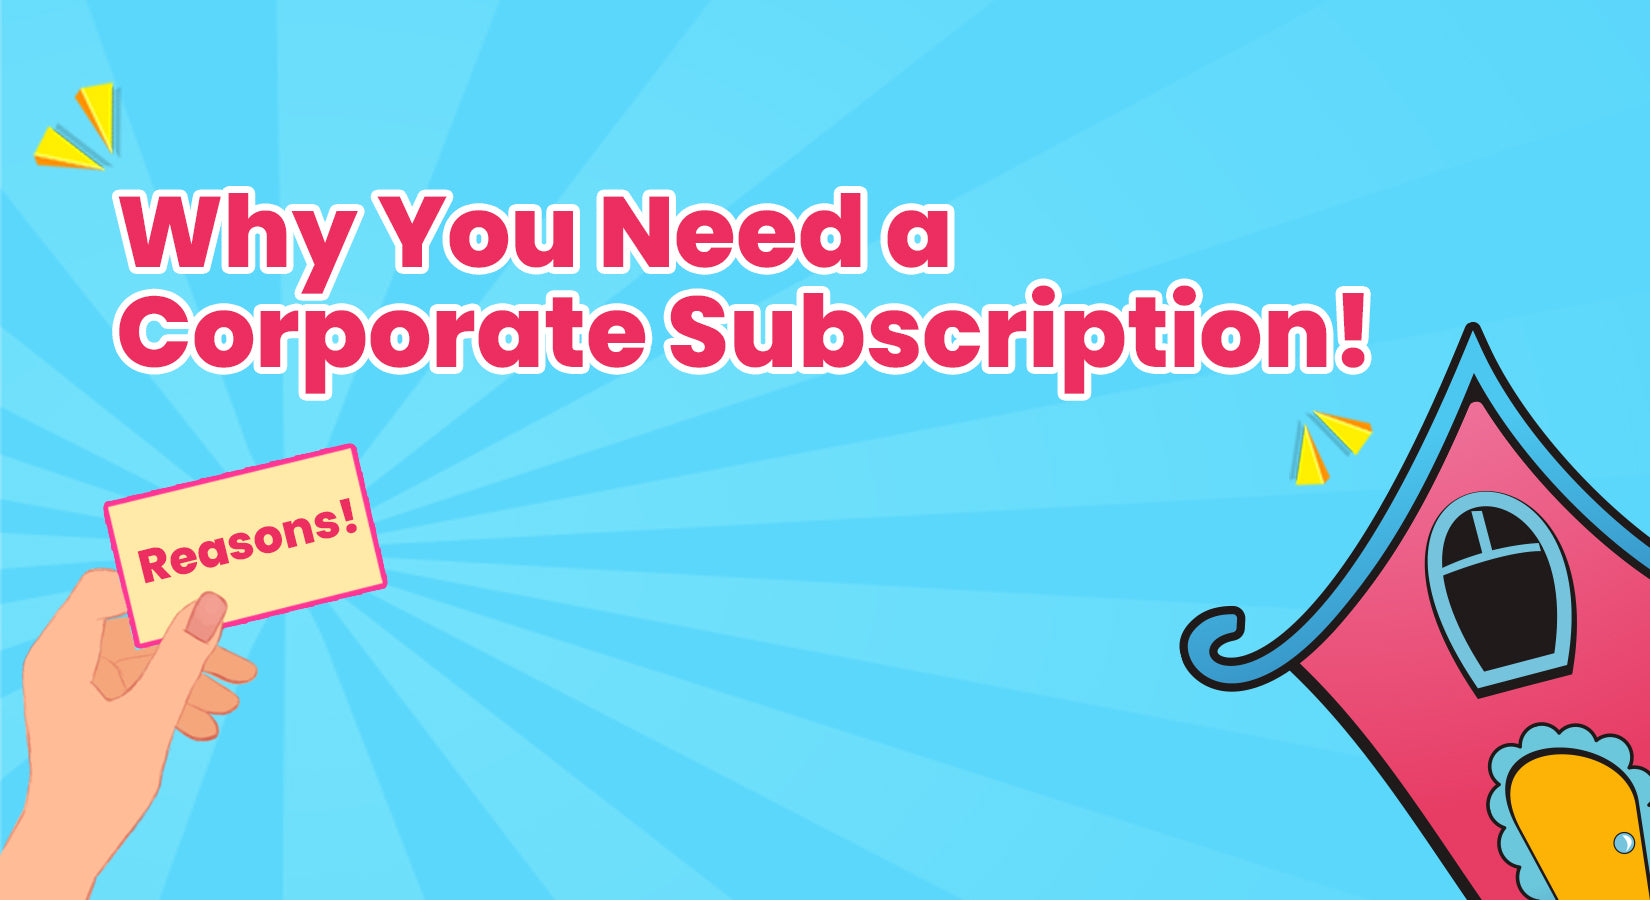 Why You Need a Corporate Subscription